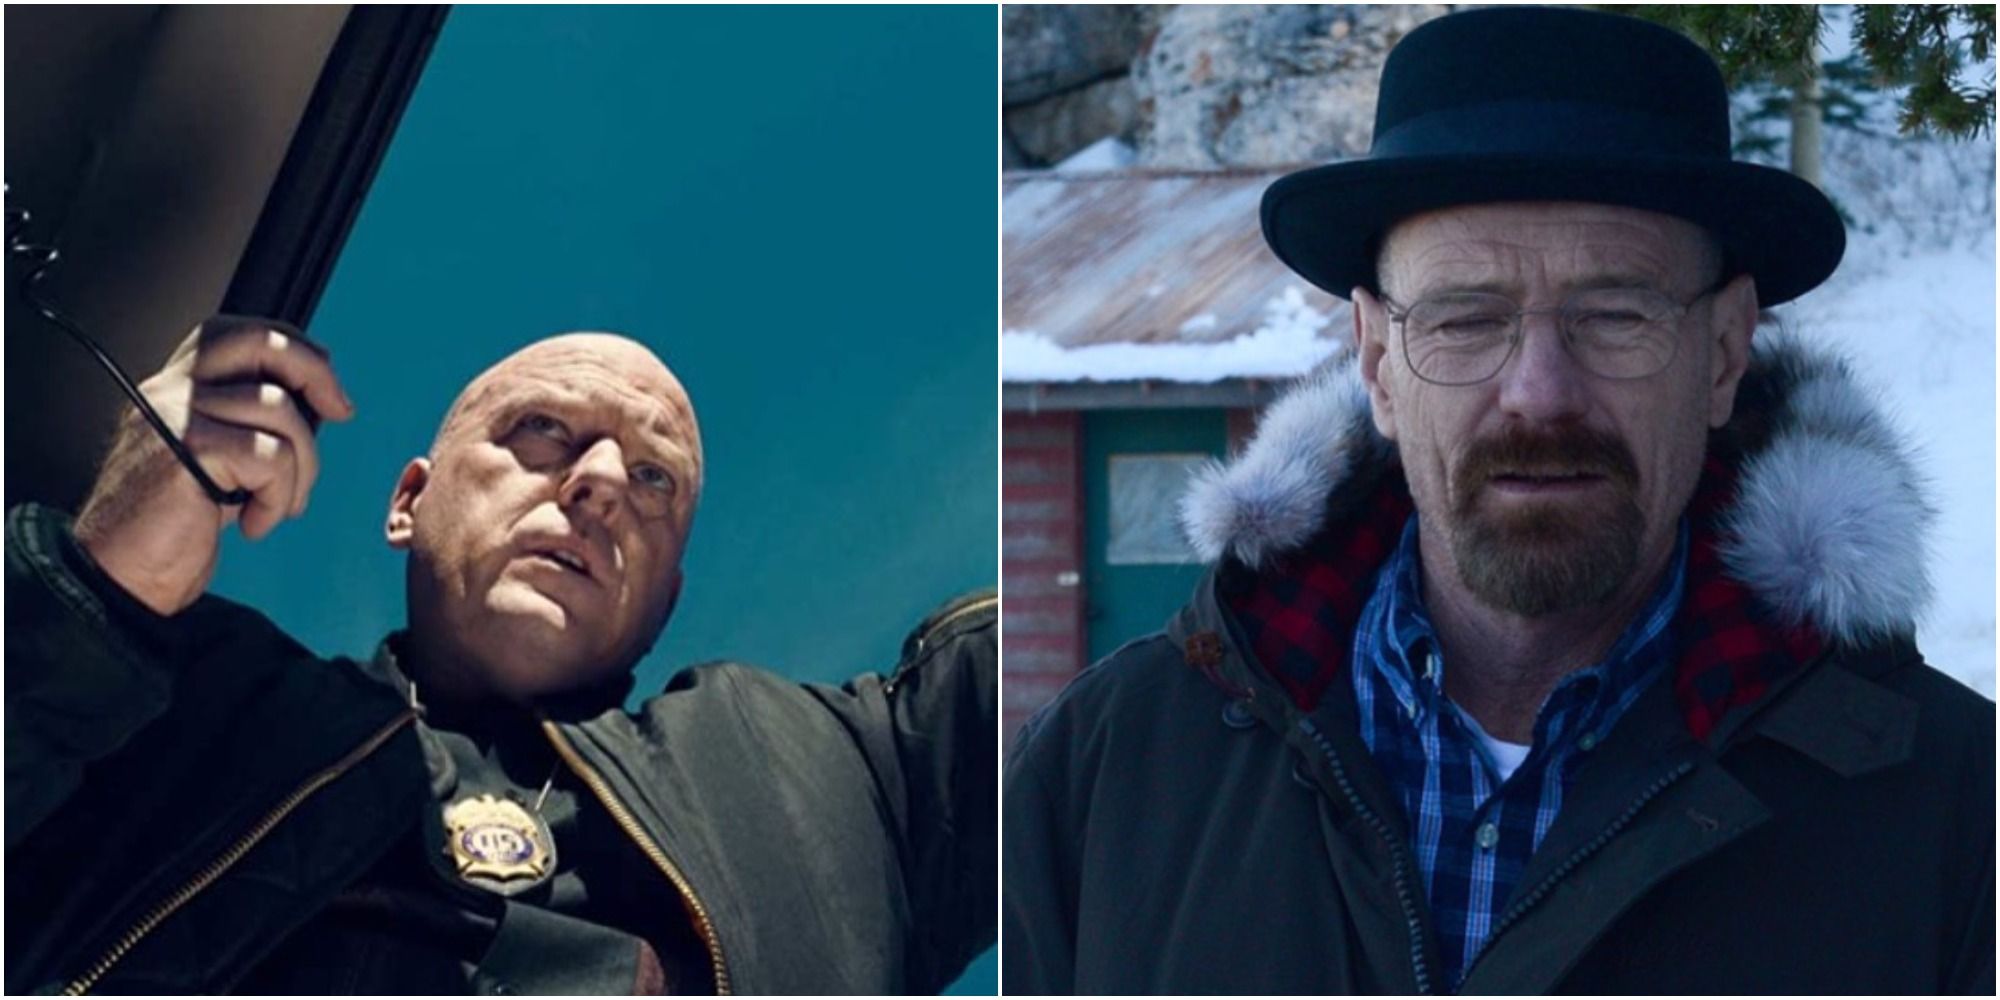 This Is The Best Breaking Bad Episode According To Fans